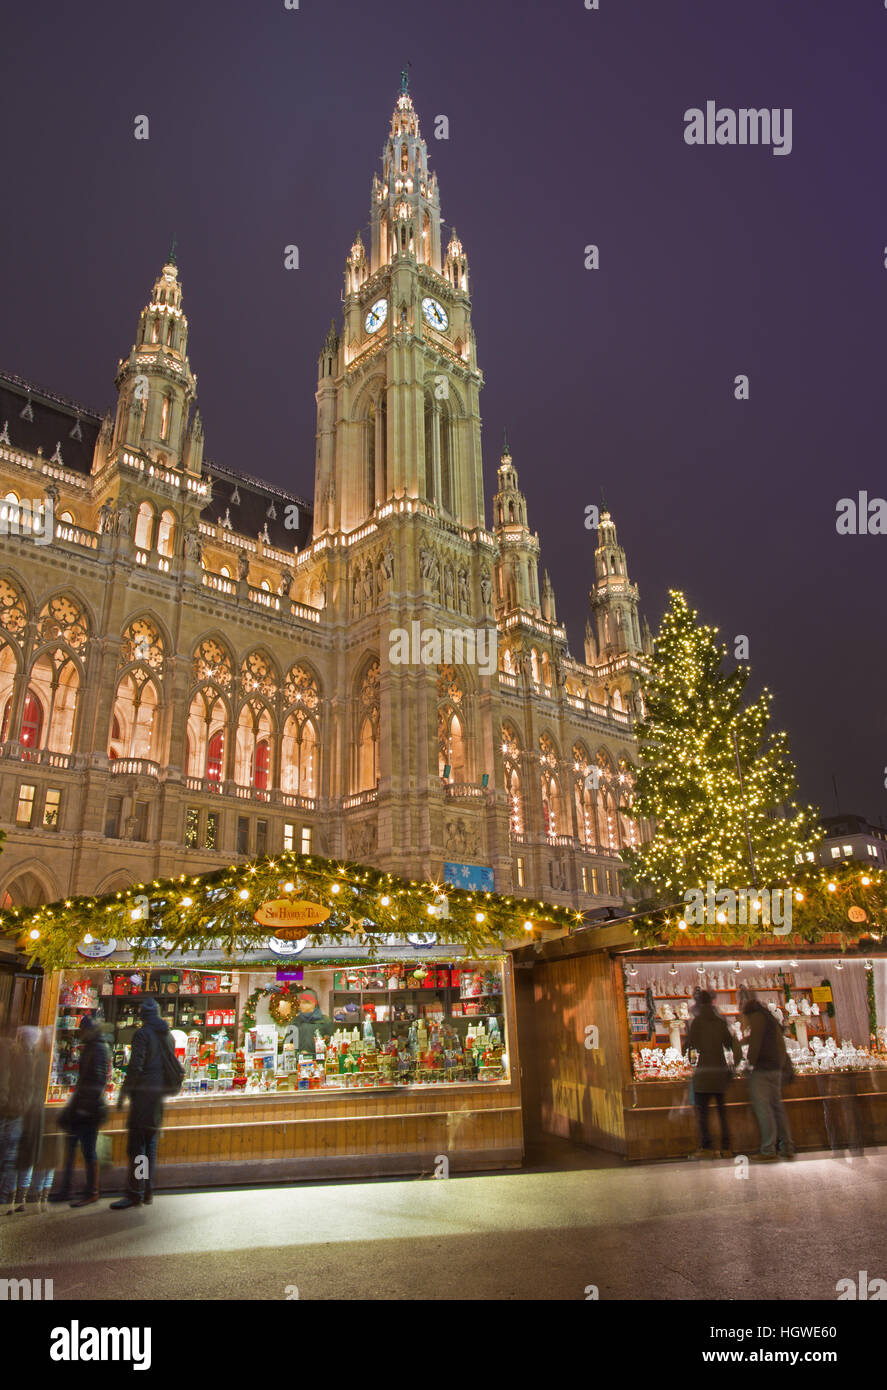 VIENNA, AUSTRIA - DECEMBER 19, 2014: The town-hall or Rathaus and christmas market on the Rathausplatz square. Stock Photo